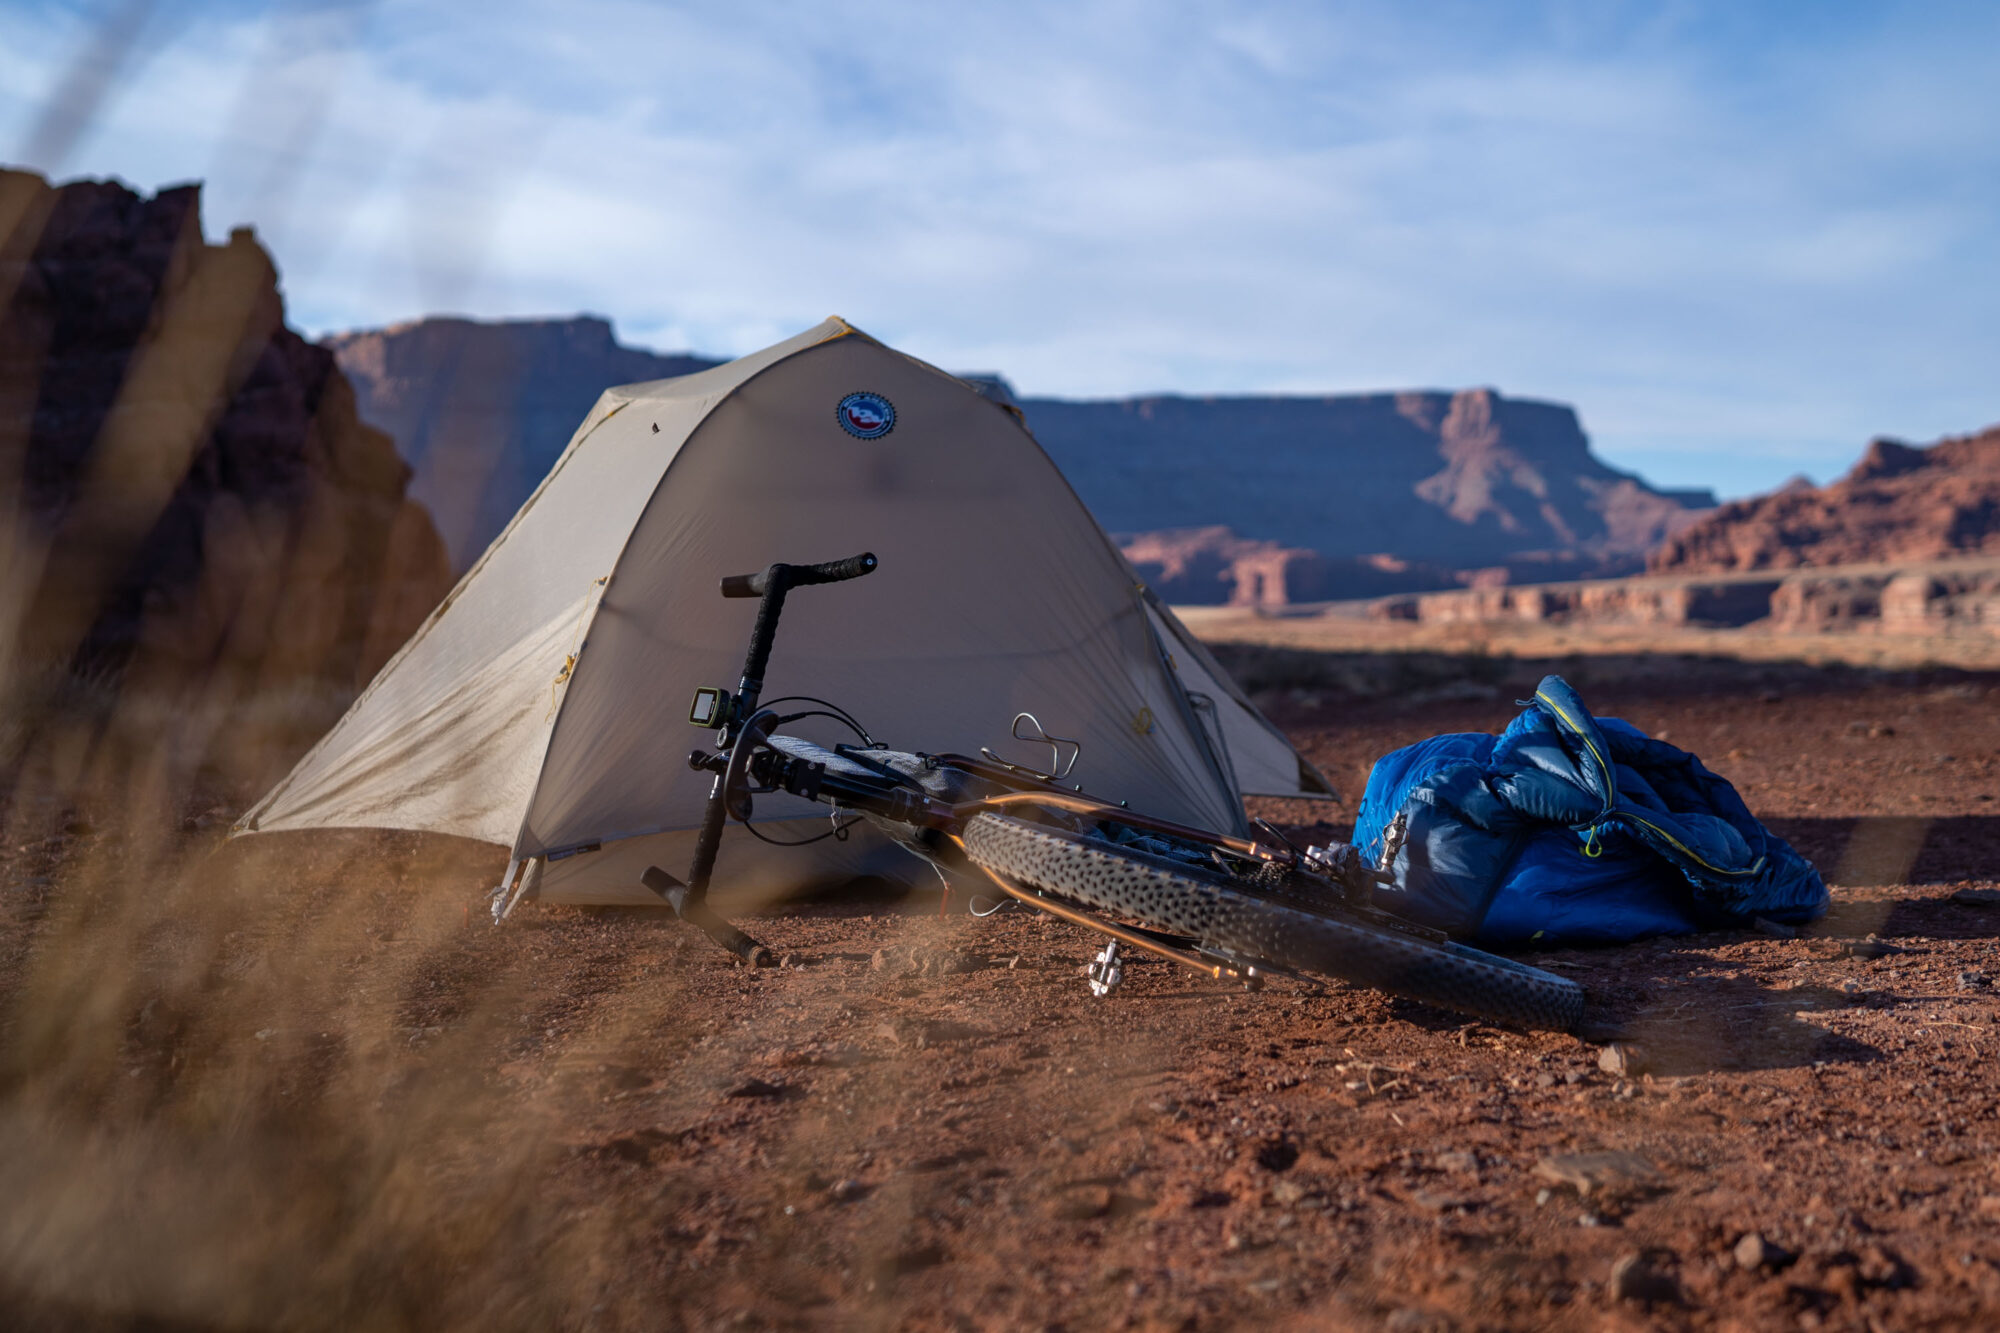 How to Find a Campsite While Bikepacking